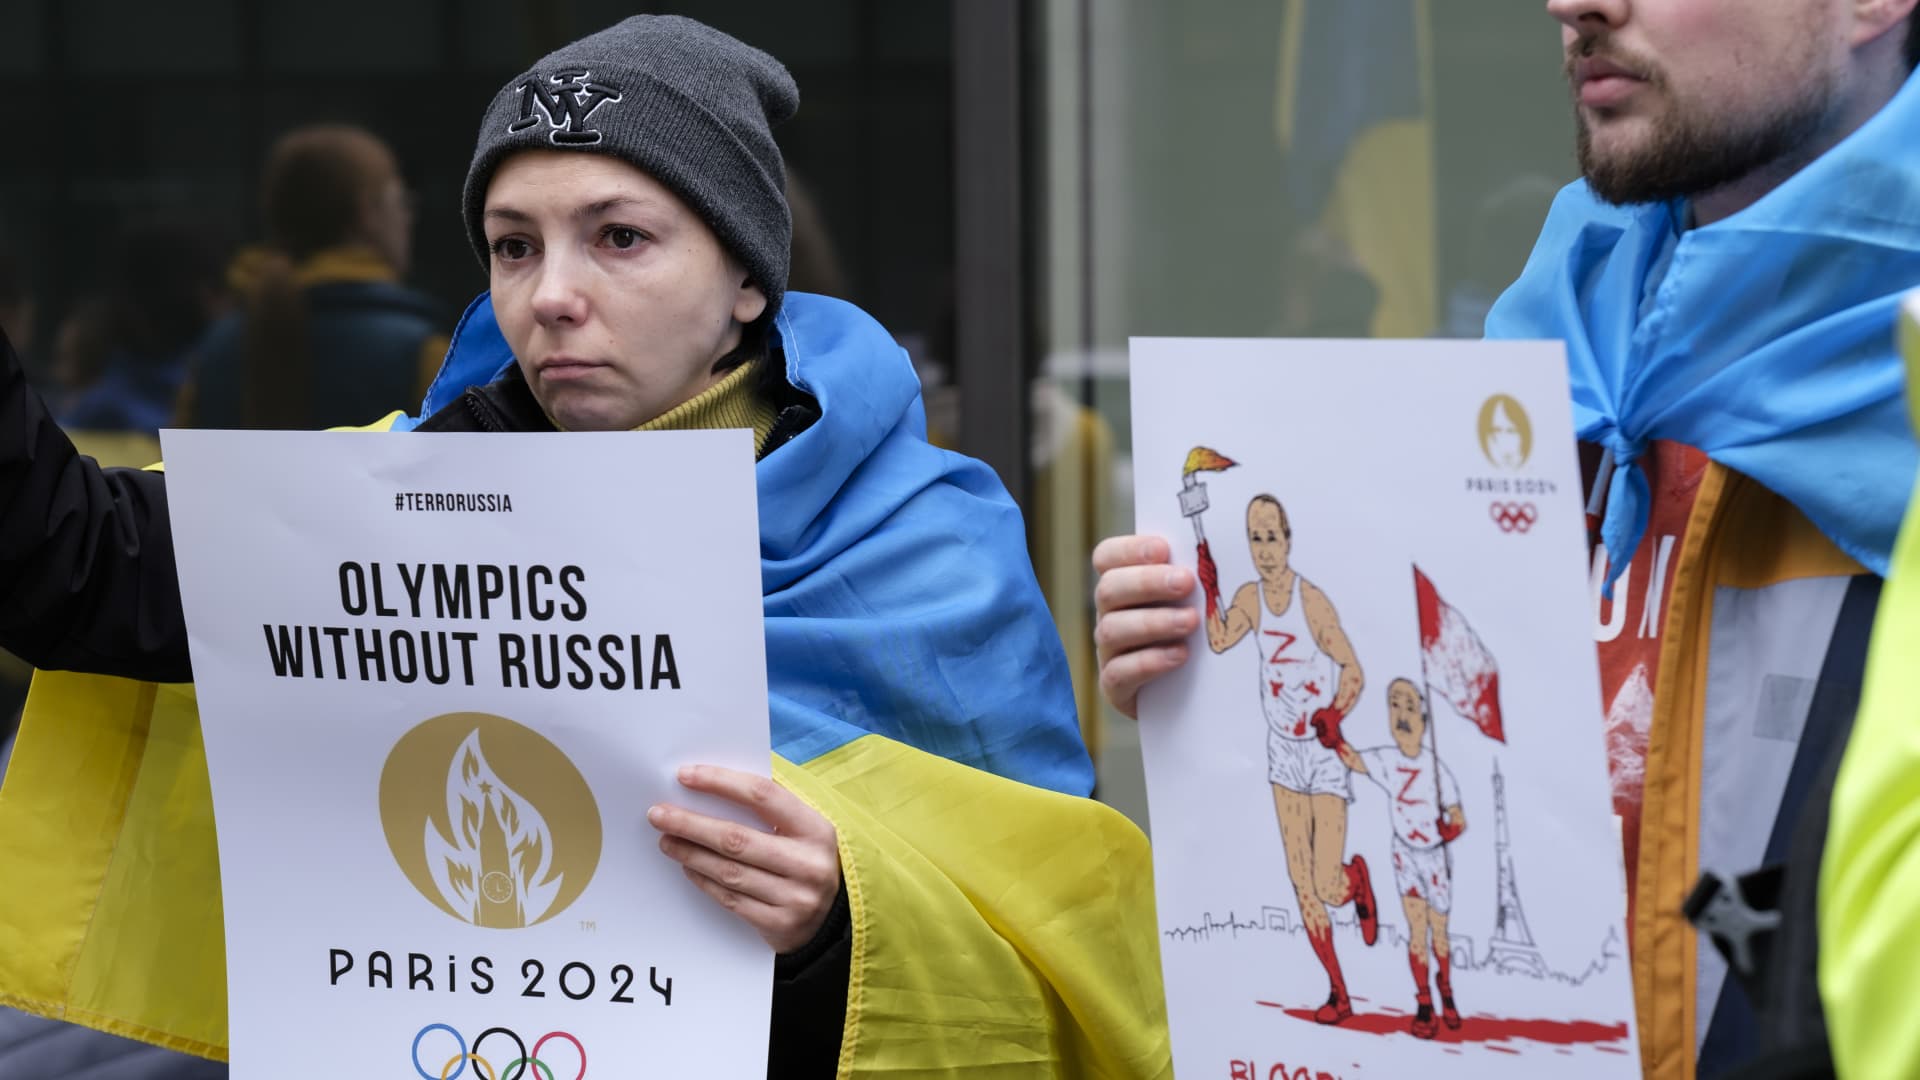 A group of Ukrainians demonstrate in front of the European headquarter of the International Olympic Committee (IOC) on March 29, 2023 in Brussels, Belgium.